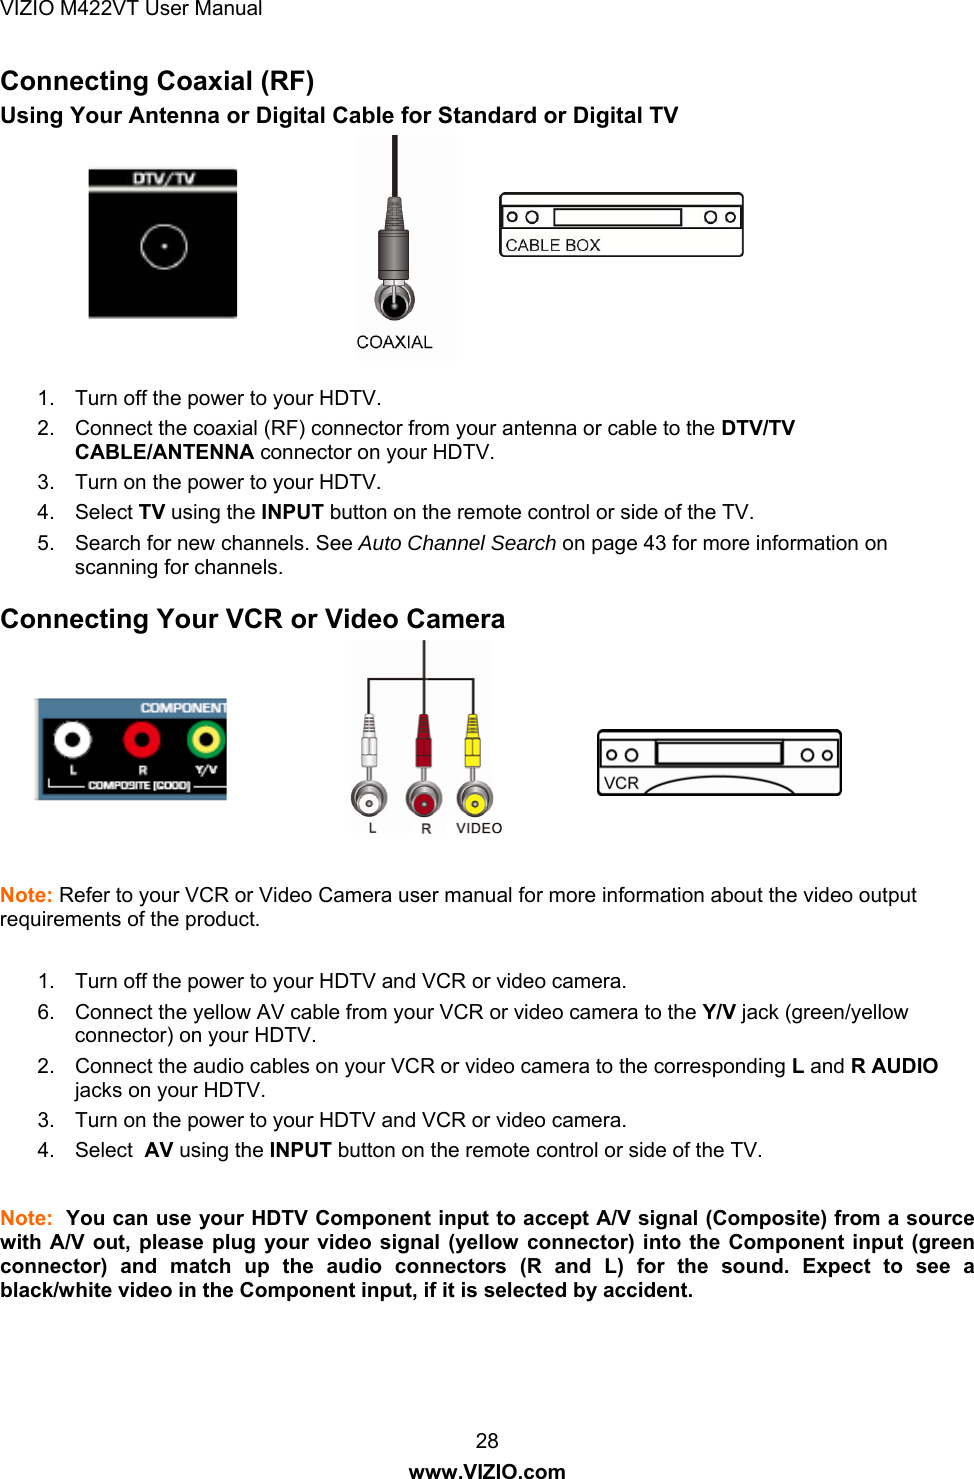 VIZIO M422VT User Manual 28 www.VIZIO.com Connecting Coaxial (RF) Using Your Antenna or Digital Cable for Standard or Digital TV         1.  Turn off the power to your HDTV. 2.  Connect the coaxial (RF) connector from your antenna or cable to the DTV/TV CABLE/ANTENNA connector on your HDTV. 3.  Turn on the power to your HDTV. 4. Select TV using the INPUT button on the remote control or side of the TV. 5.  Search for new channels. See Auto Channel Search on page 43 for more information on scanning for channels.  Connecting Your VCR or Video Camera         Note: Refer to your VCR or Video Camera user manual for more information about the video output requirements of the product.  1.  Turn off the power to your HDTV and VCR or video camera. 6.  Connect the yellow AV cable from your VCR or video camera to the Y/V jack (green/yellow connector) on your HDTV. 2.  Connect the audio cables on your VCR or video camera to the corresponding L and R AUDIO jacks on your HDTV. 3.  Turn on the power to your HDTV and VCR or video camera. 4. Select  AV using the INPUT button on the remote control or side of the TV.  Note:  You can use your HDTV Component input to accept A/V signal (Composite) from a source with A/V out, please plug your video signal (yellow connector) into the Component input (green connector) and match up the audio connectors (R and L) for the sound. Expect to see a black/white video in the Component input, if it is selected by accident.  